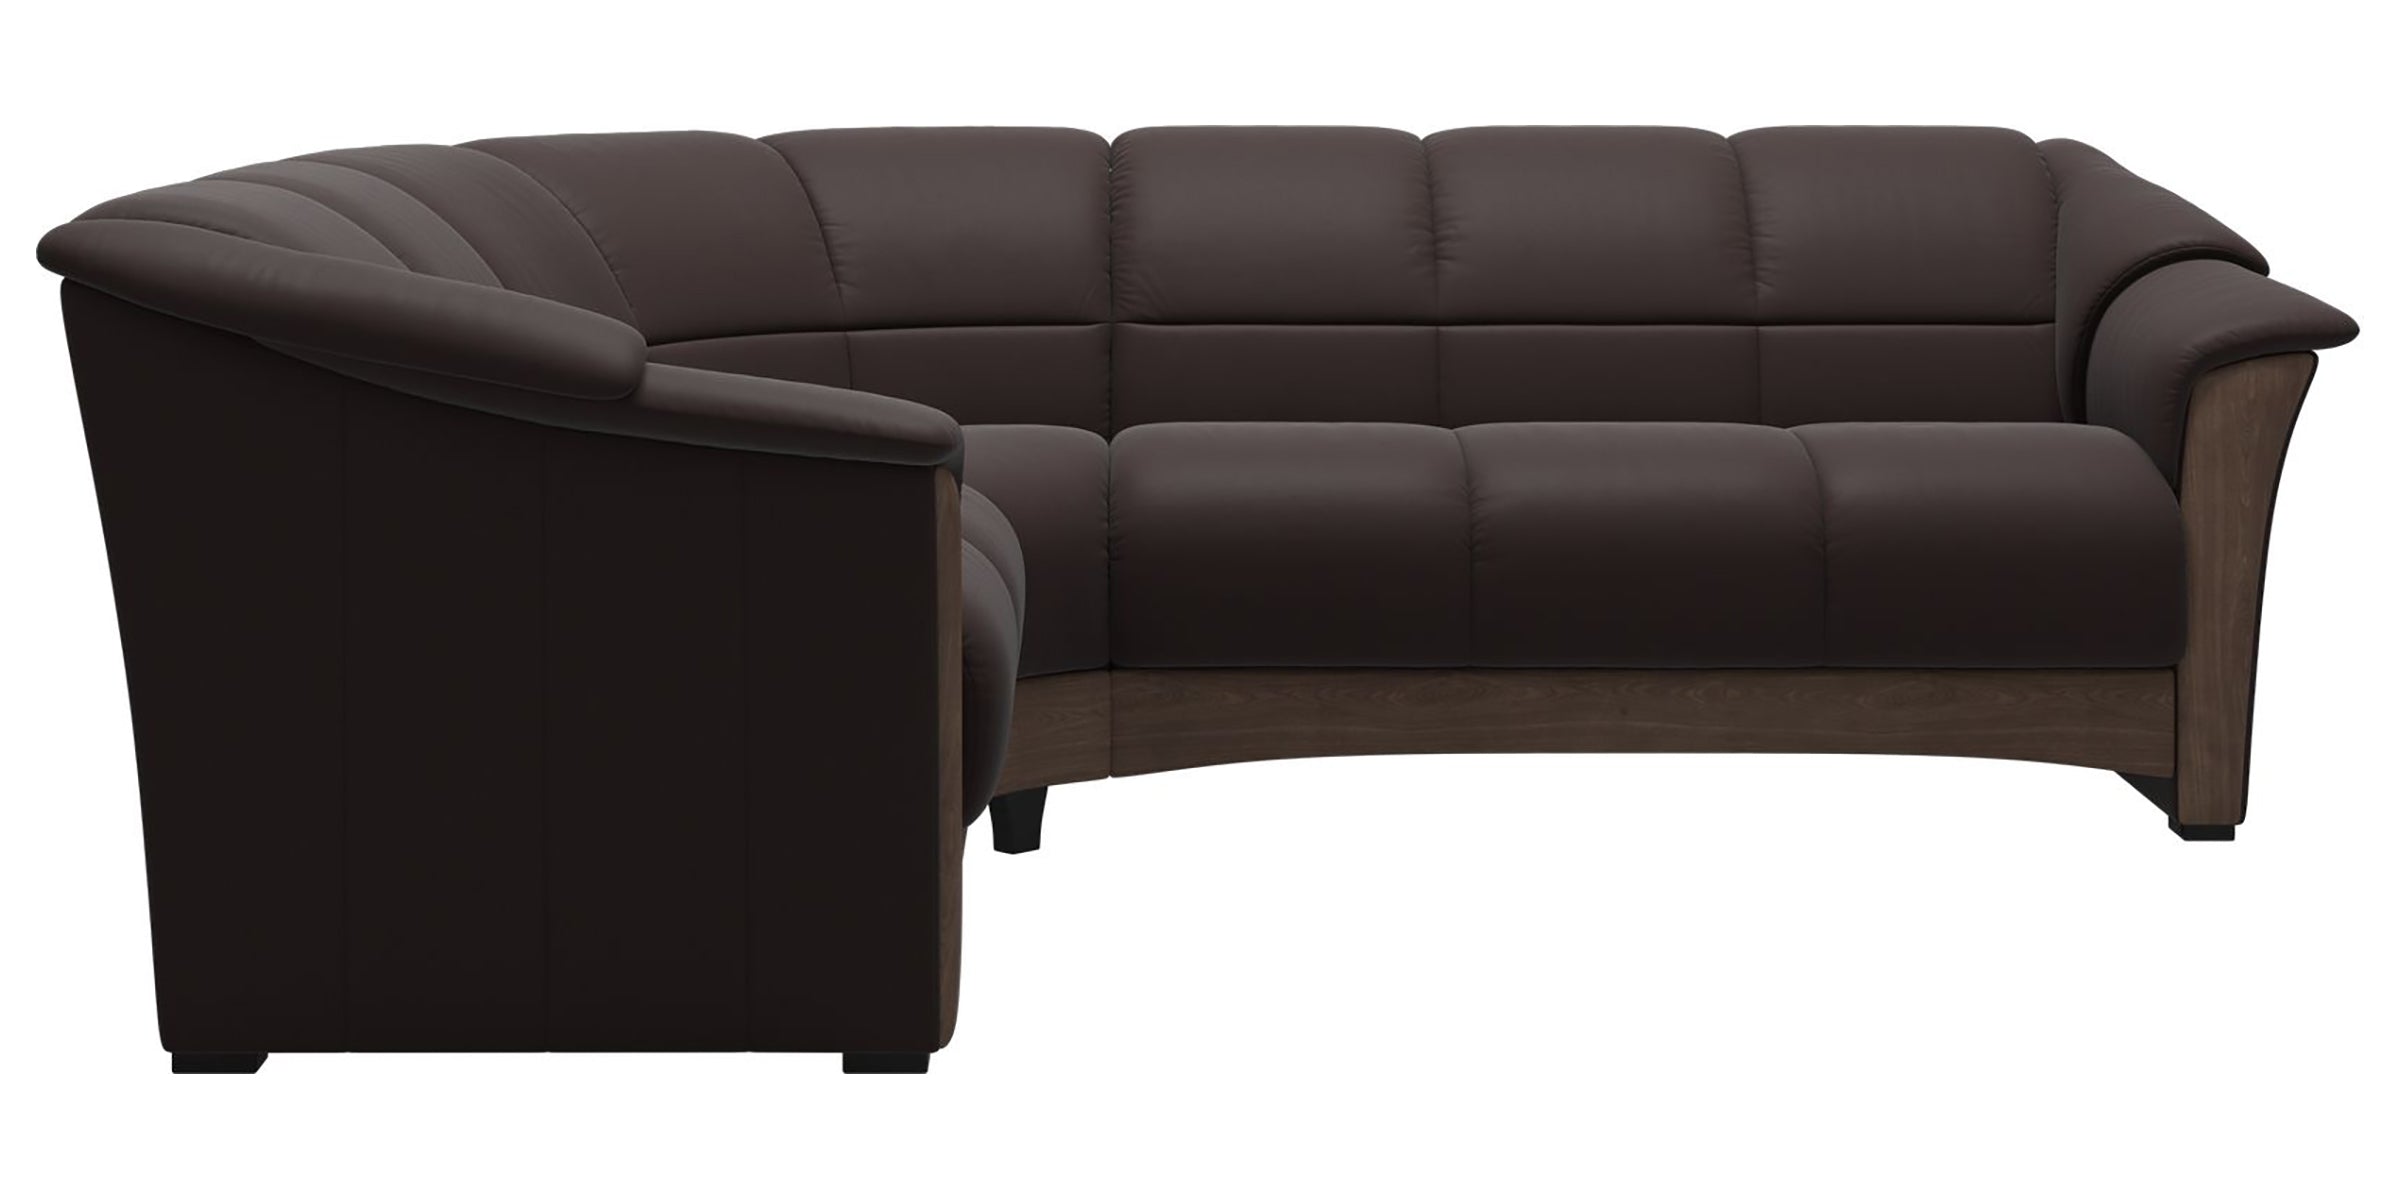 Paloma Leather Chocolate and Walnut Base | Stressless Oslo Sectional | Valley Ridge Furniture